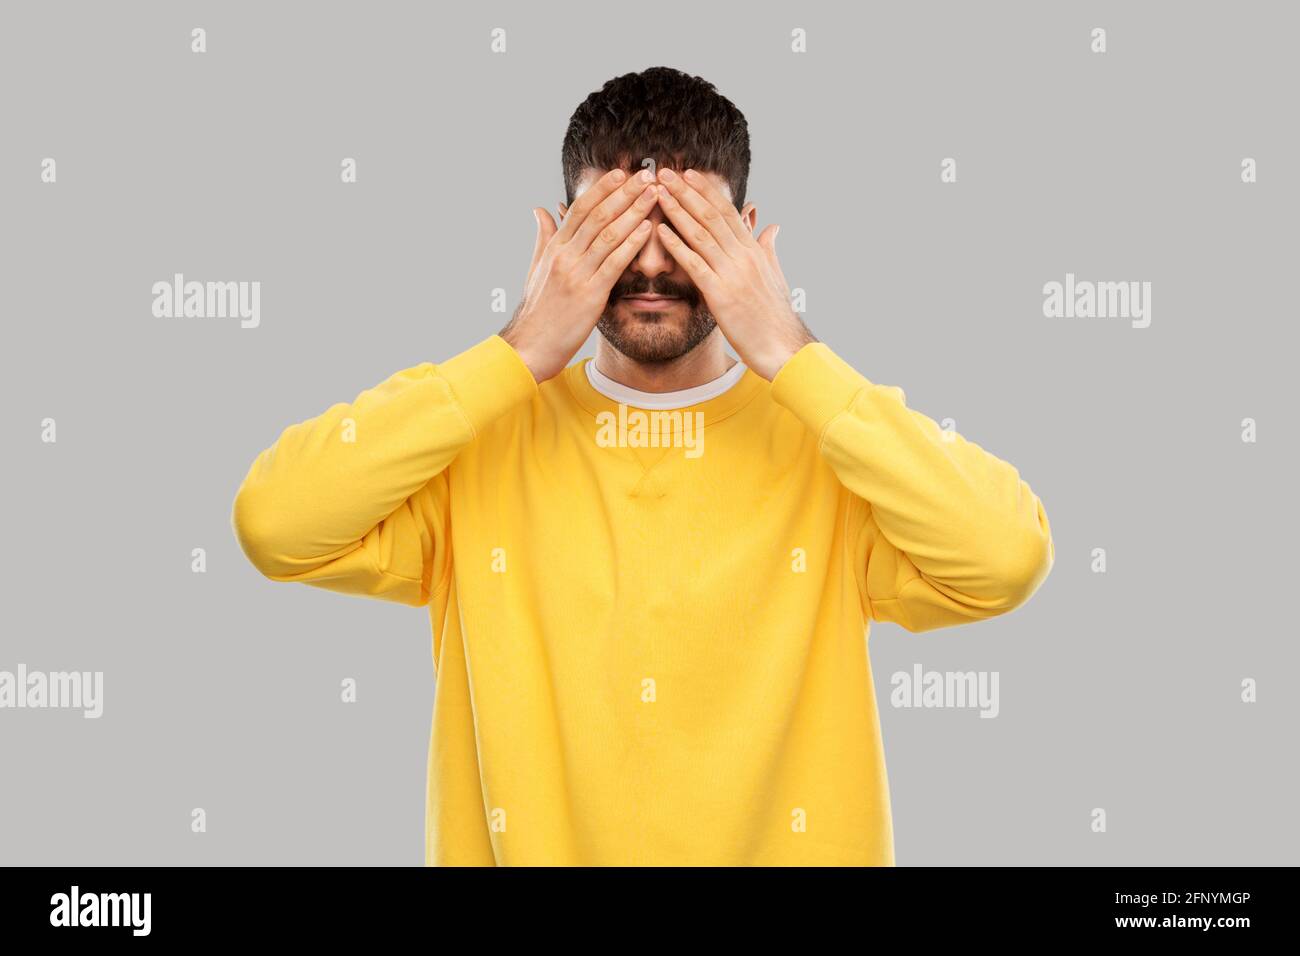 man in yellow sweatshirt closing his eyes by hands Stock Photo